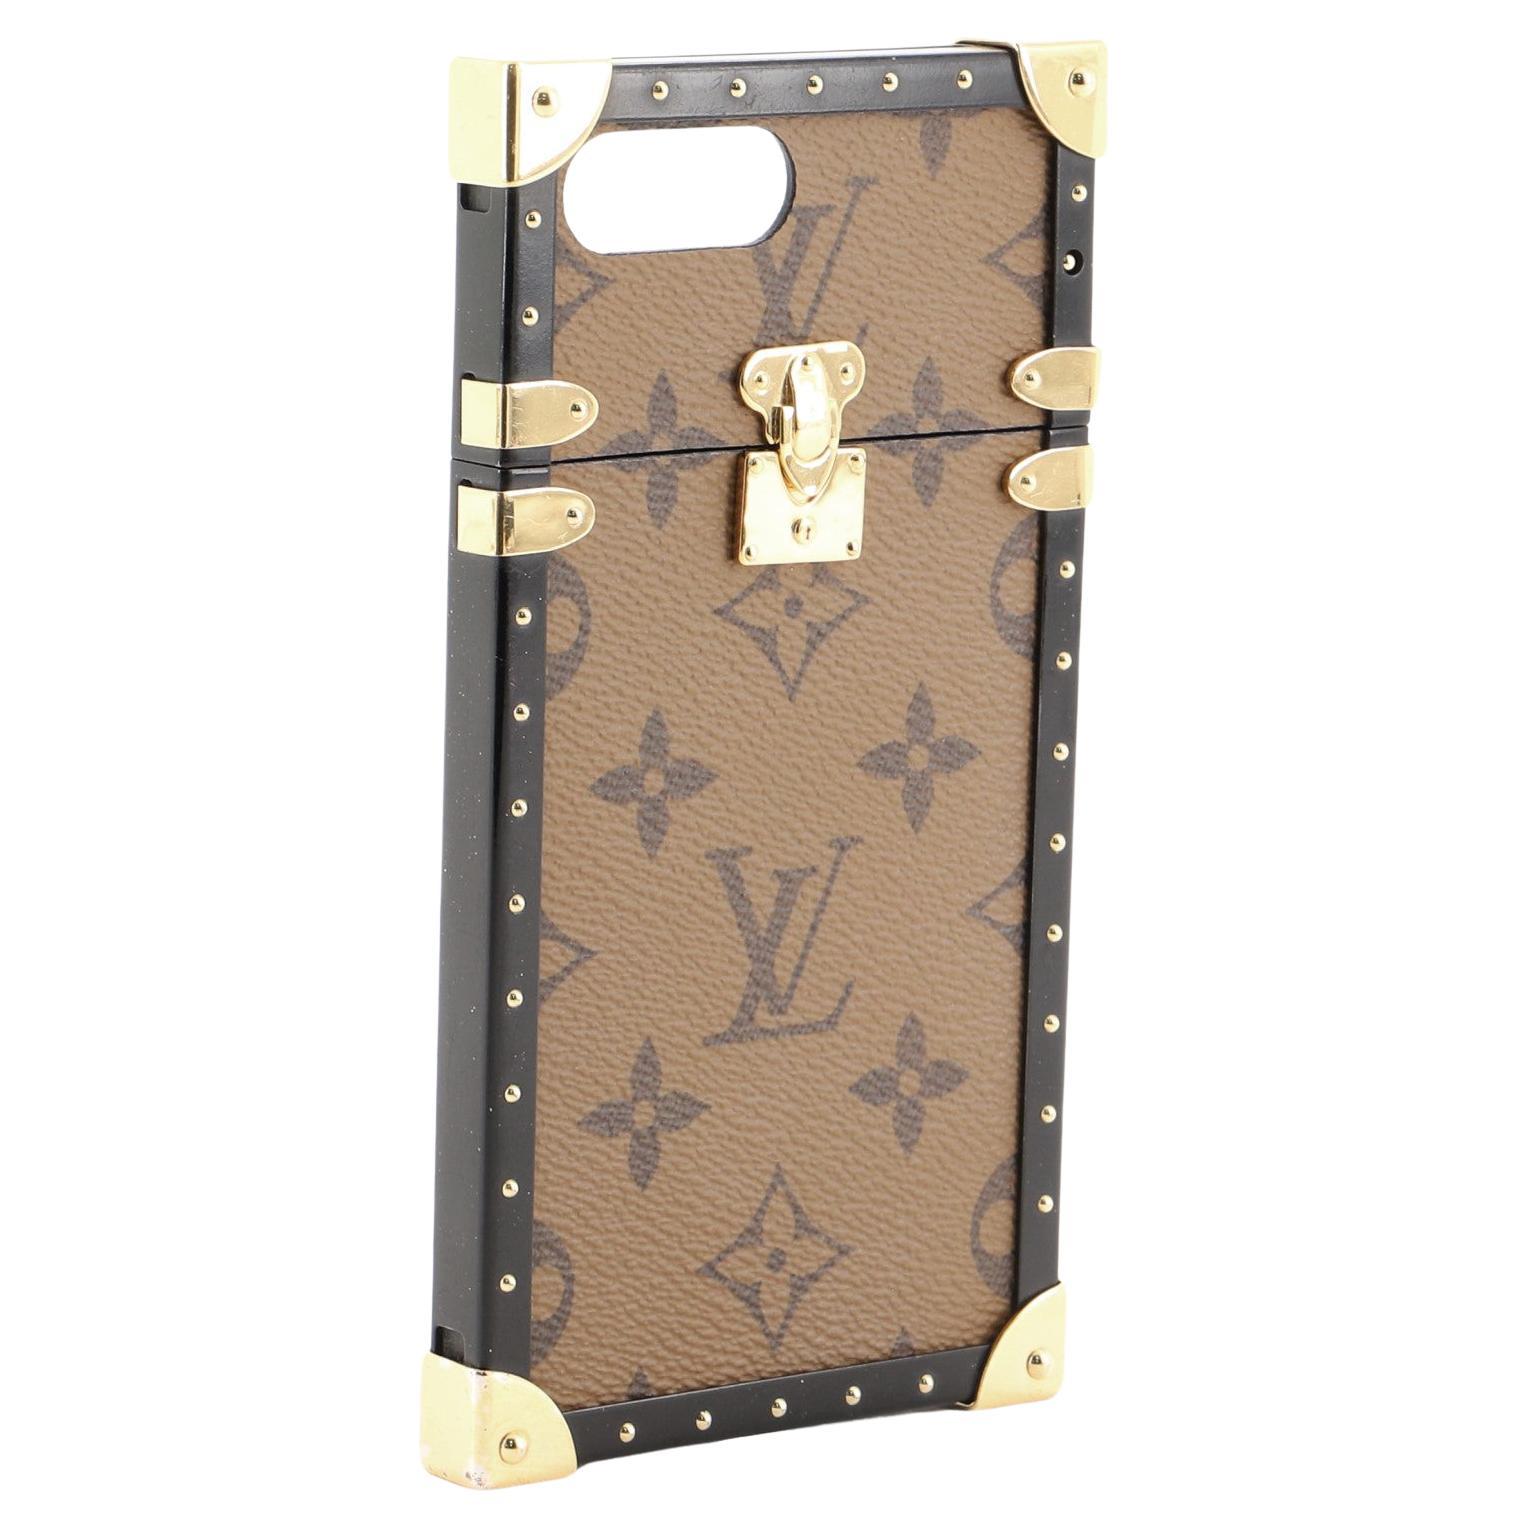 Louis Vuitton Eye Trunk with Strap for iPhone X Plus Reverse Monogram Canvas